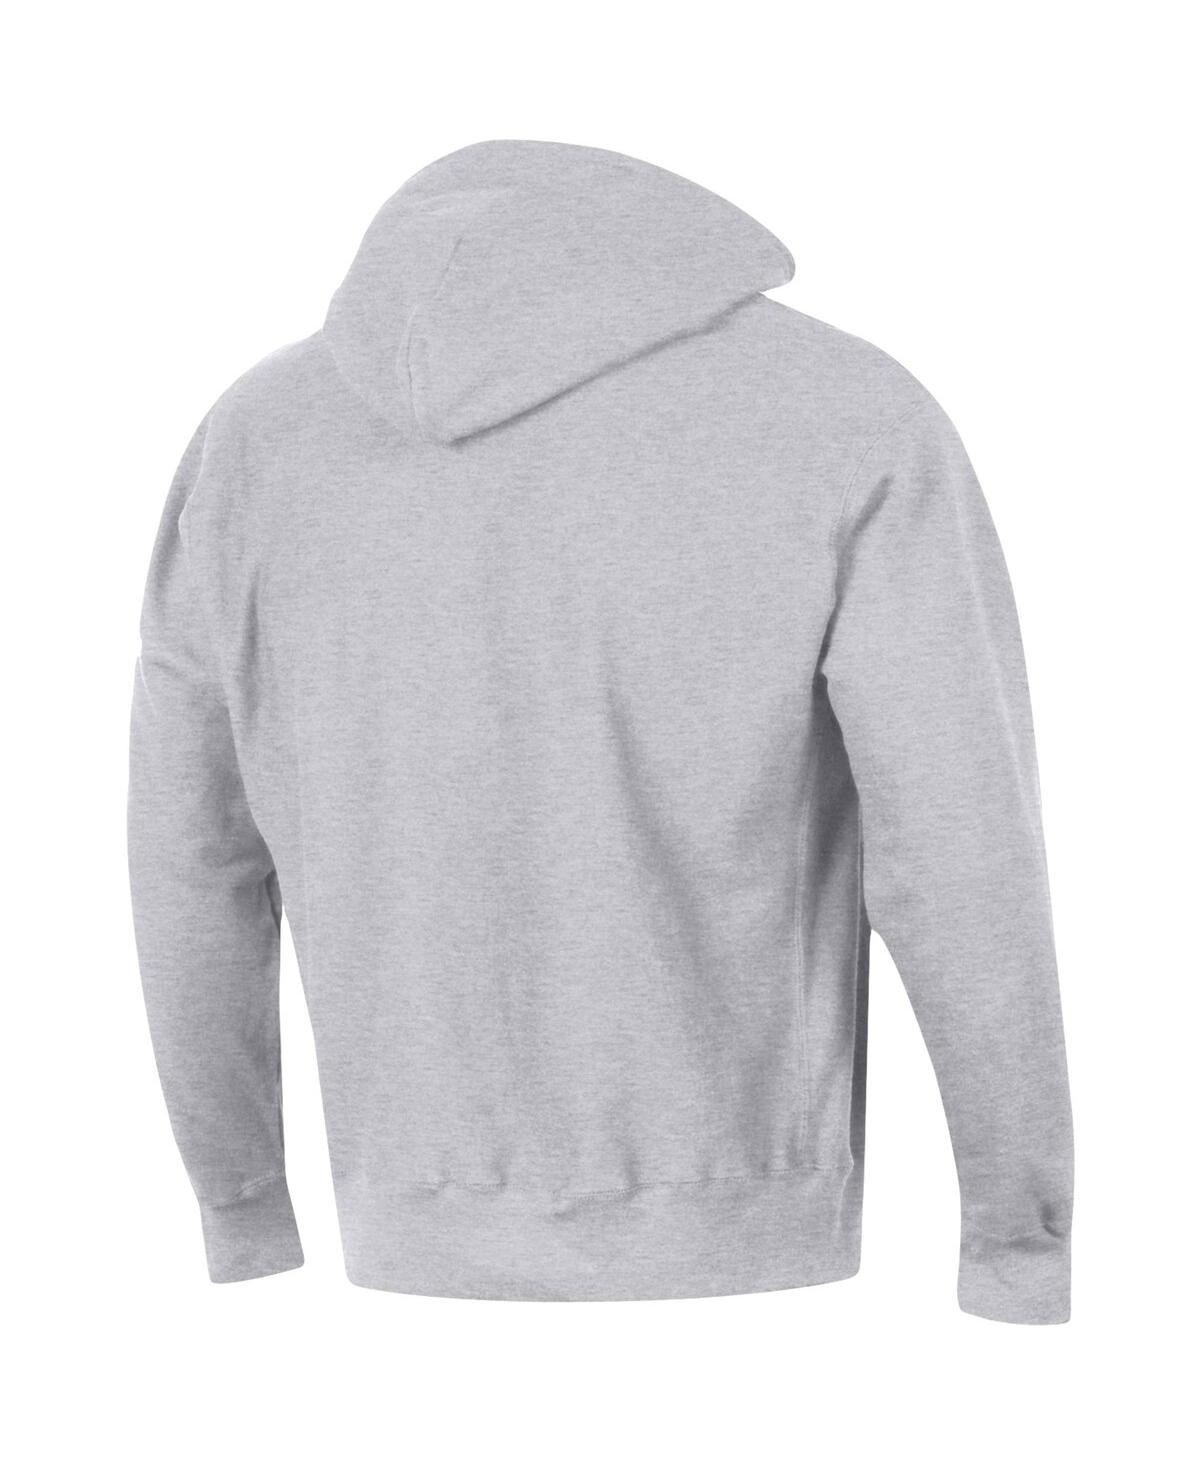 Shop Champion Men's  Heathered Gray Wisconsin Badgers Team Arch Reverse Weave Pullover Hoodie